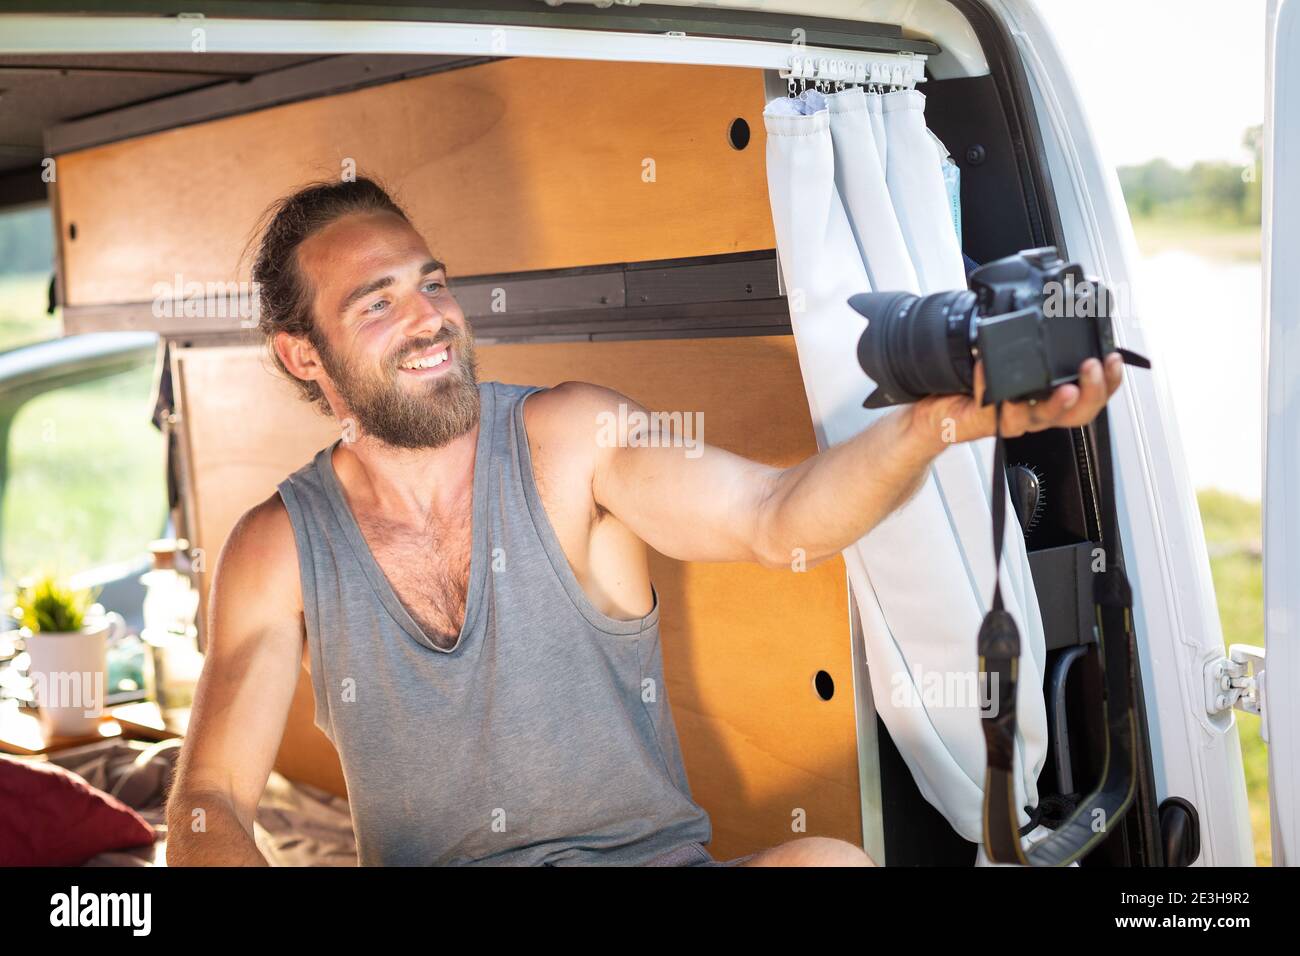 Smiling man in a camper van pointing a camera at himself Stock Photo